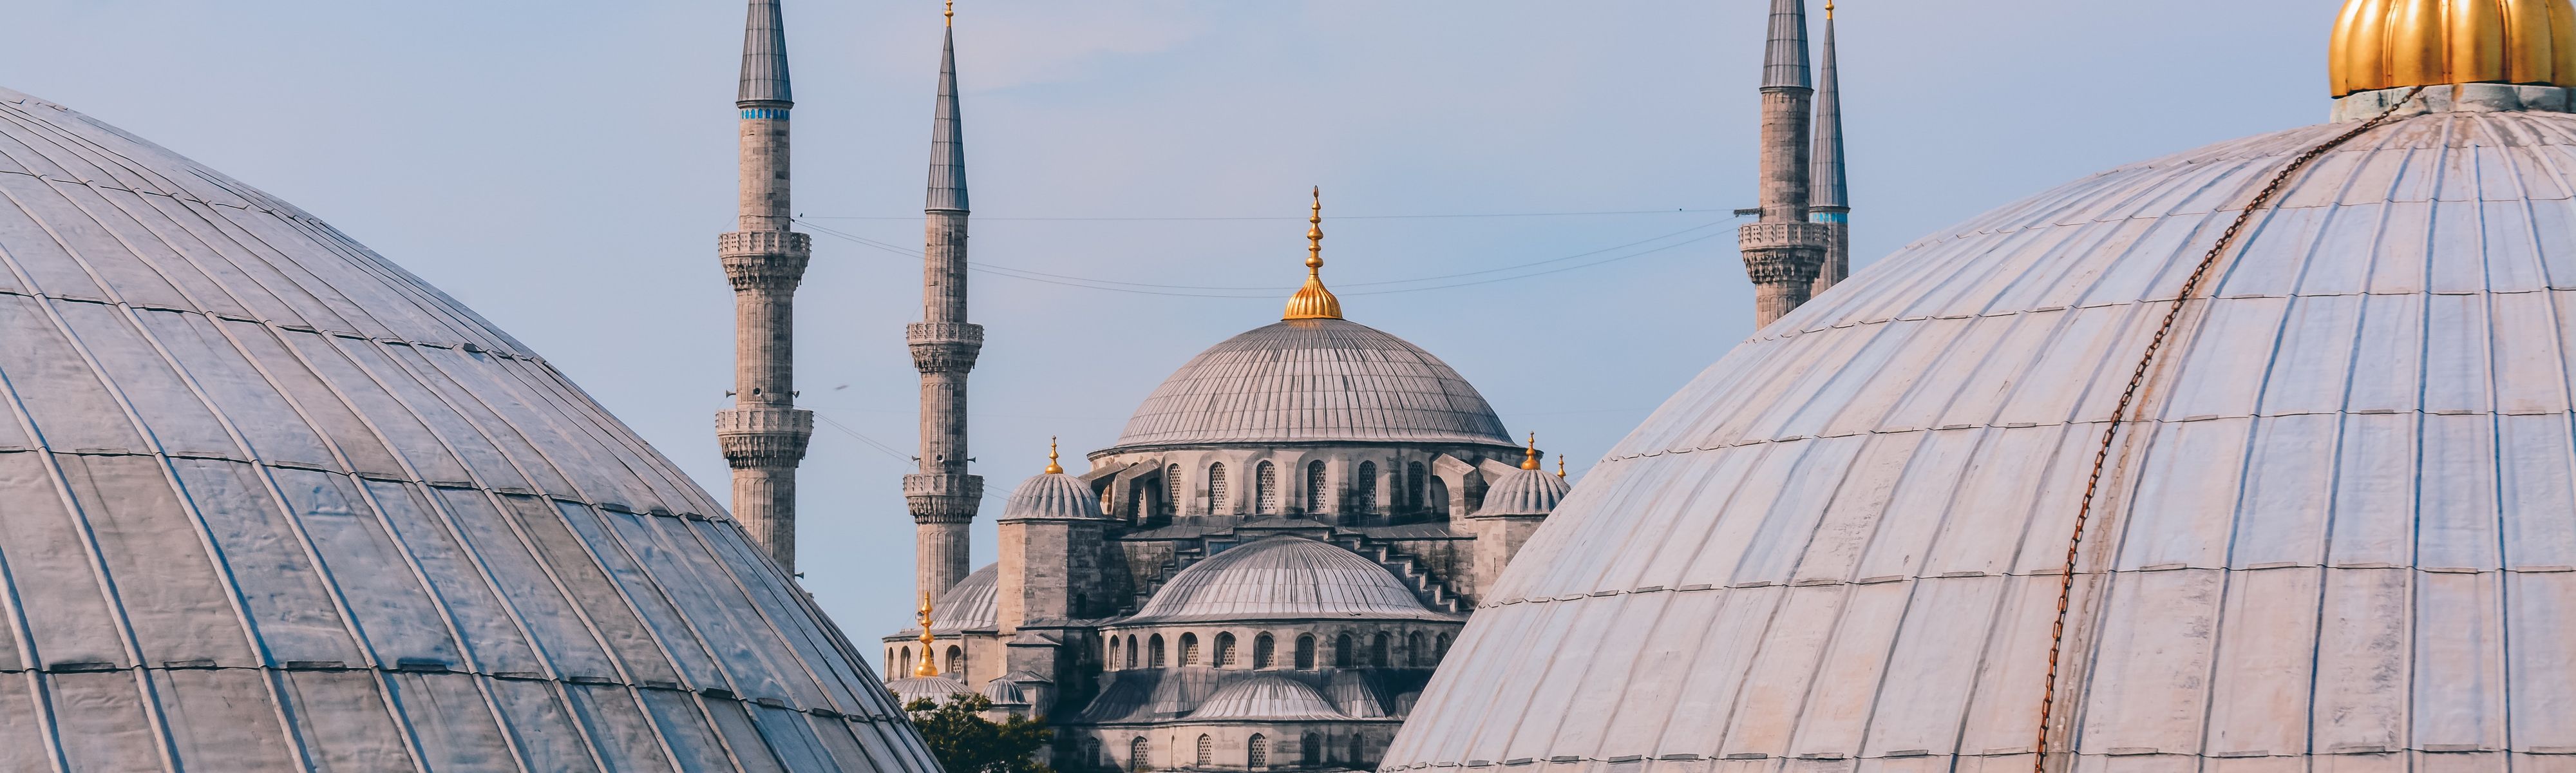 roof top domes mosques in turkey